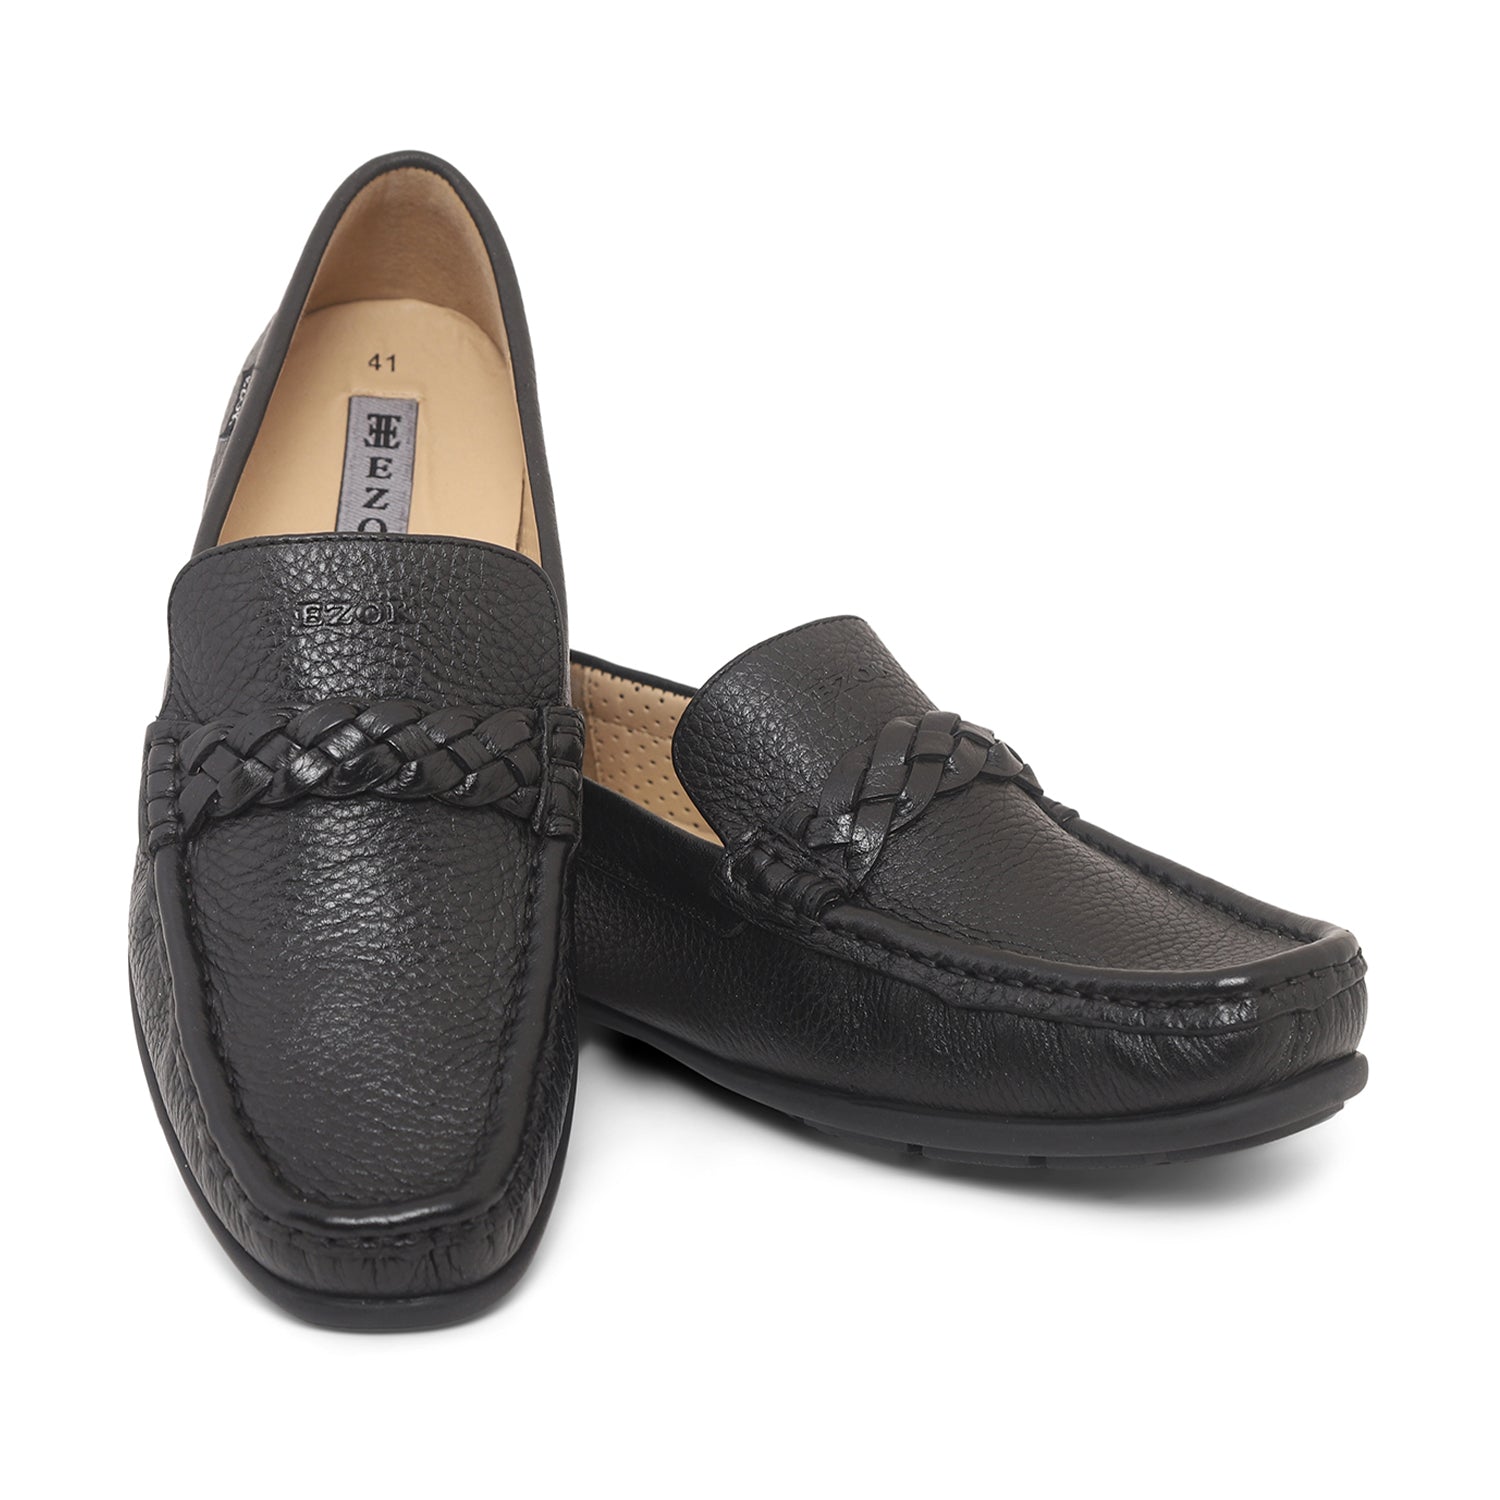 Ezok Mens Black Moccasin Driving Leather Loafers